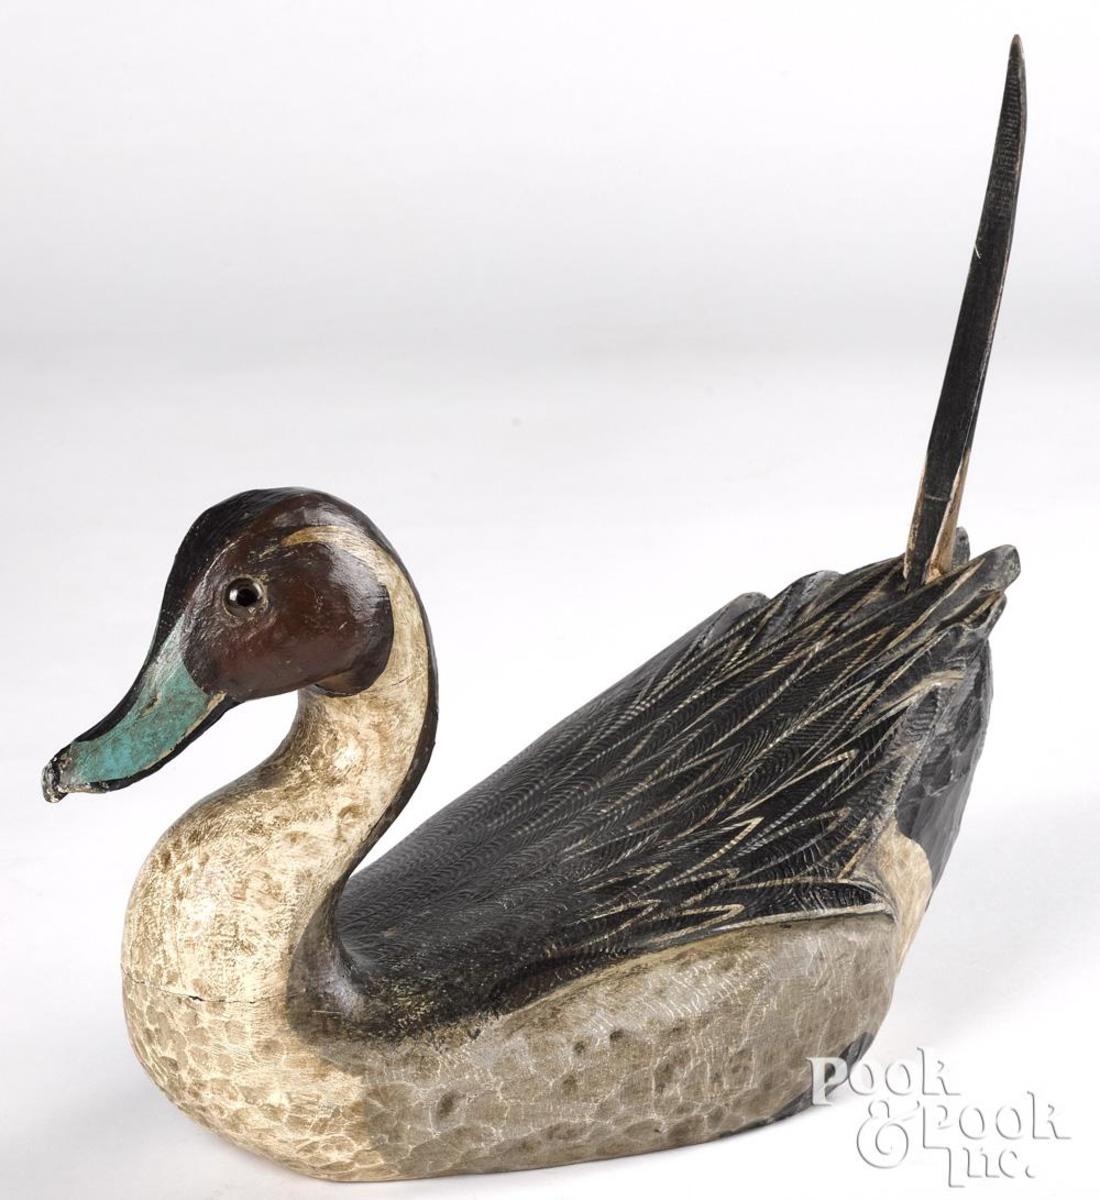 Lou Schifferl (Wisconsin b. 1931), carved and painted pintail duck decoy, signed on underside, 13-3/4" l; estimate: $160-$220.